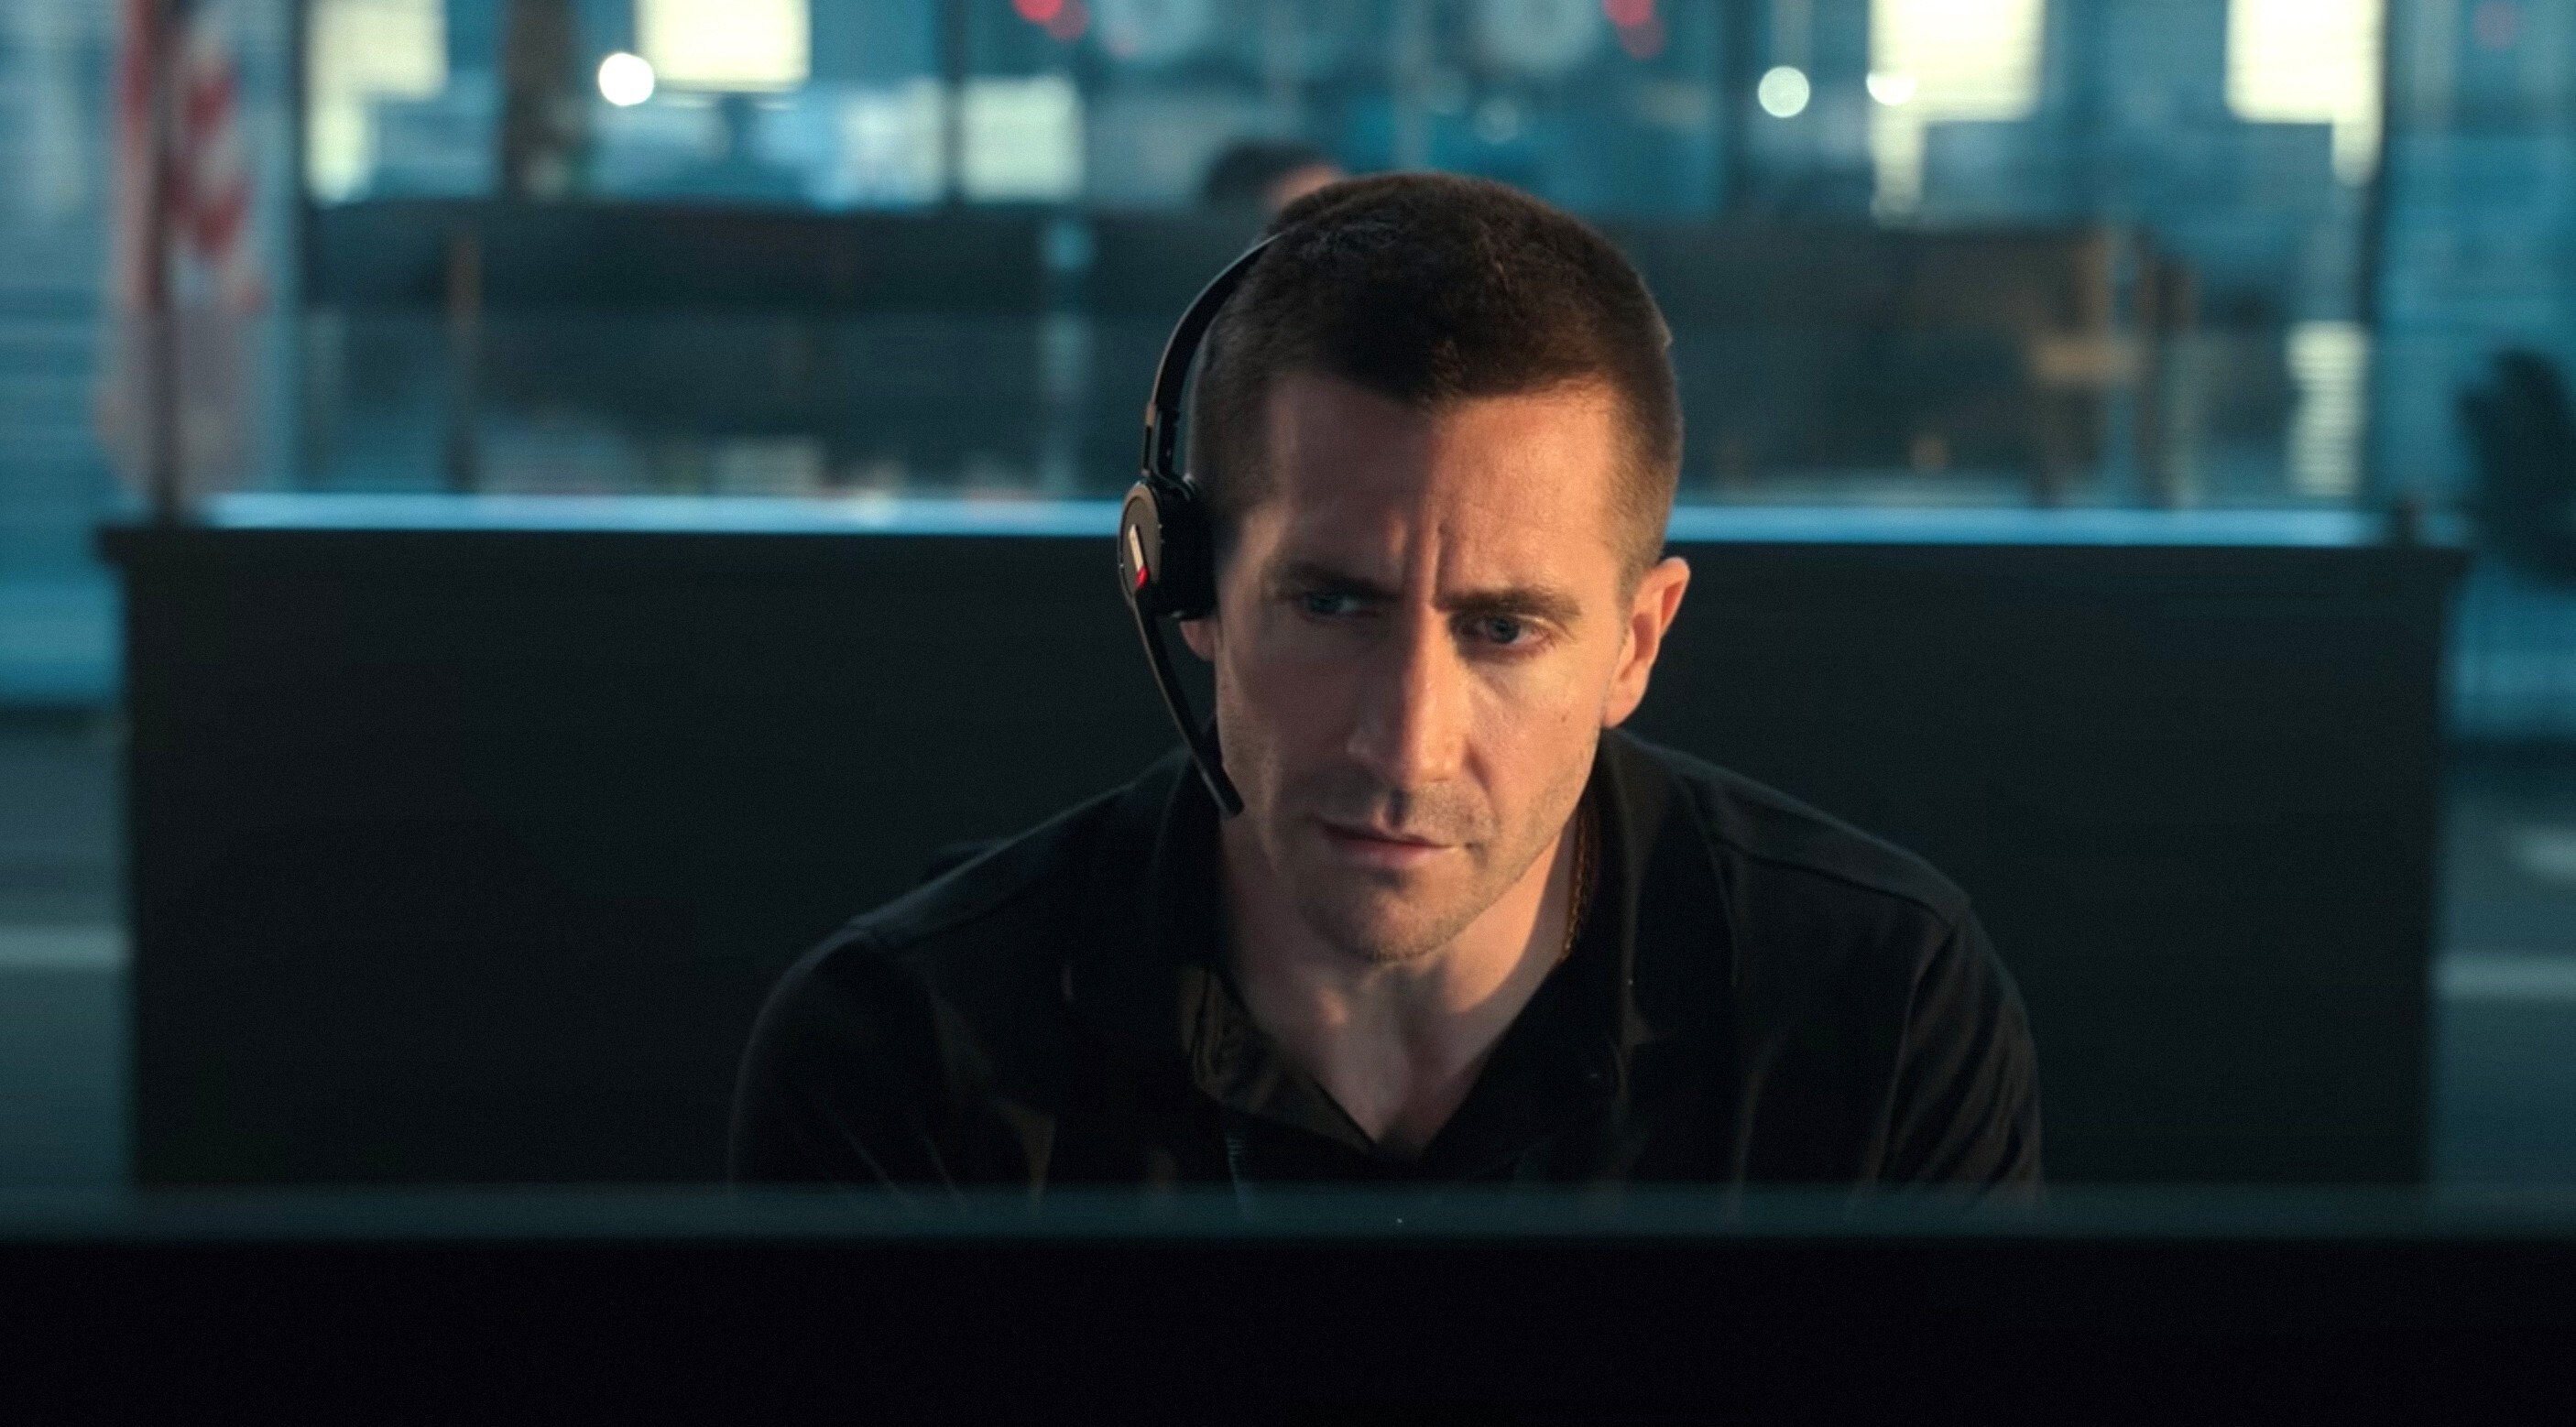 A white man with short brown hair sits wearing a headset. He looks down at a screen concerned.